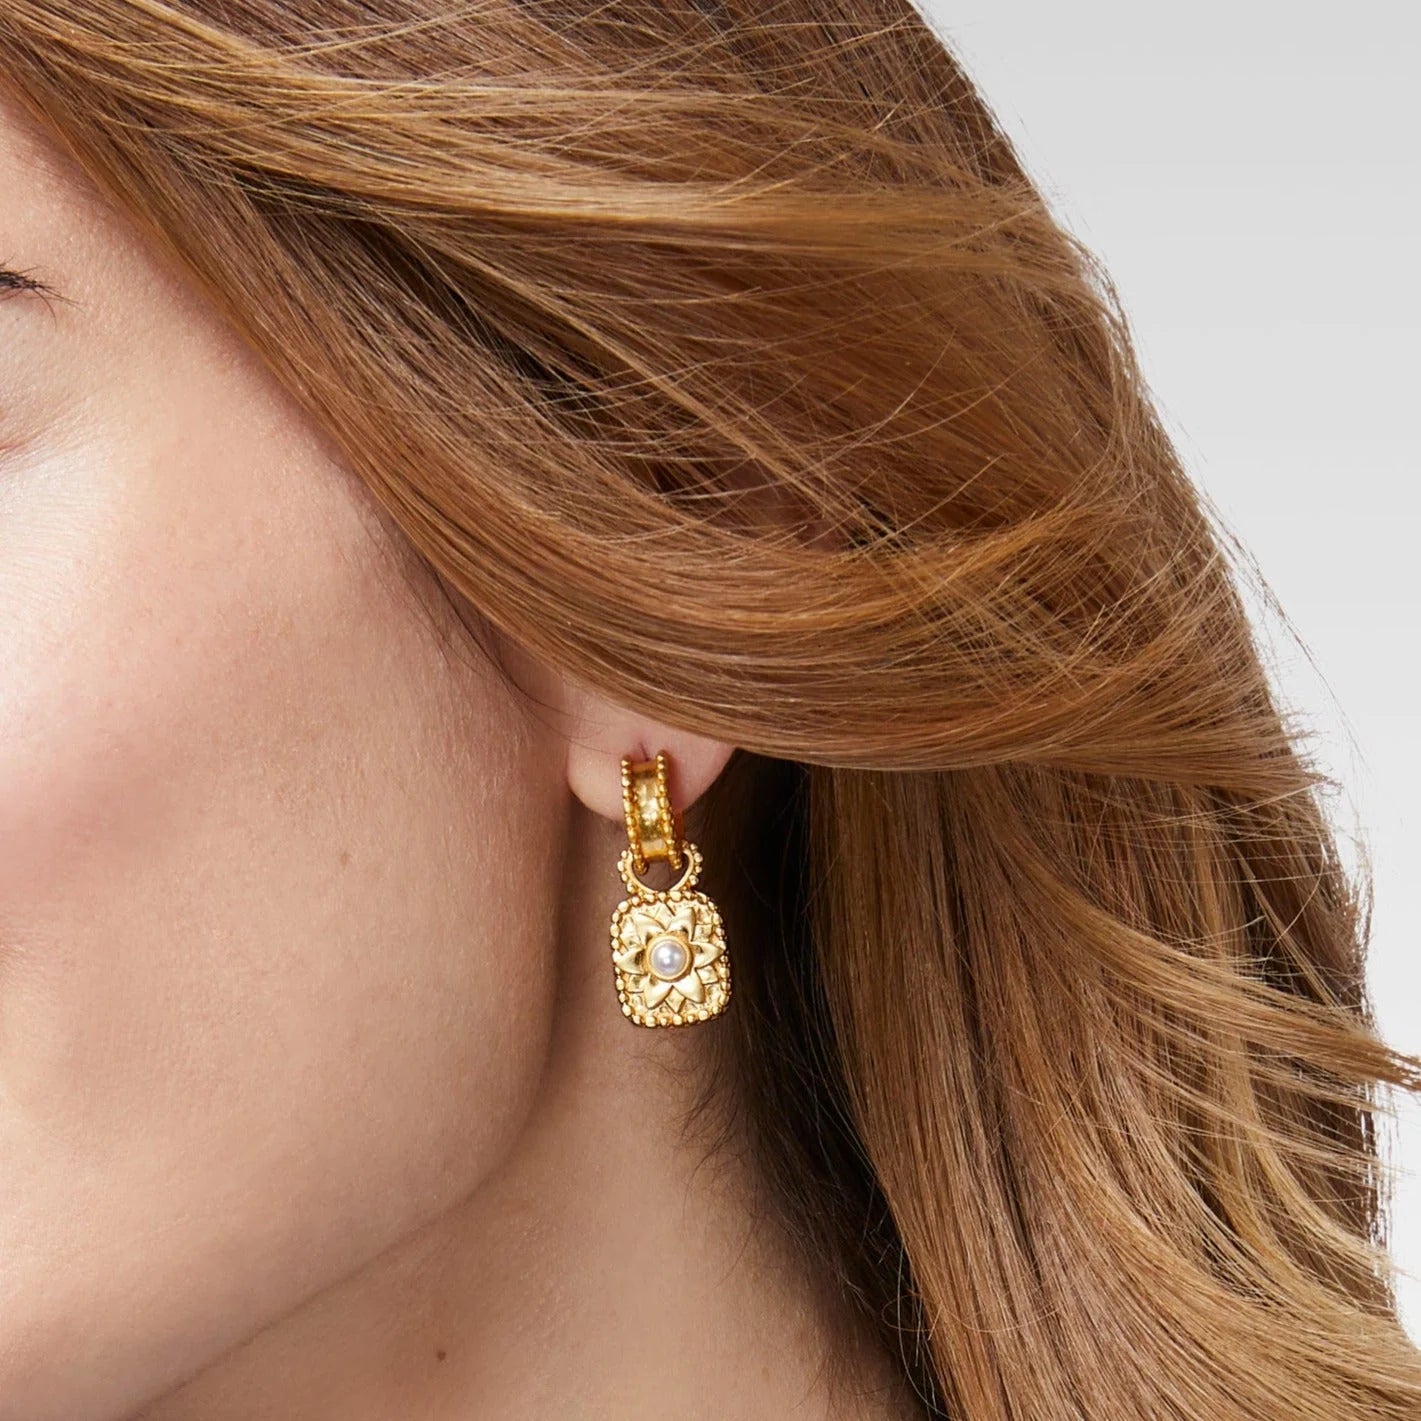 Julie Vos | Marbella Gold Hoop Earrings & Charm in Obsidian Black - Giddy Up Glamour Boutique